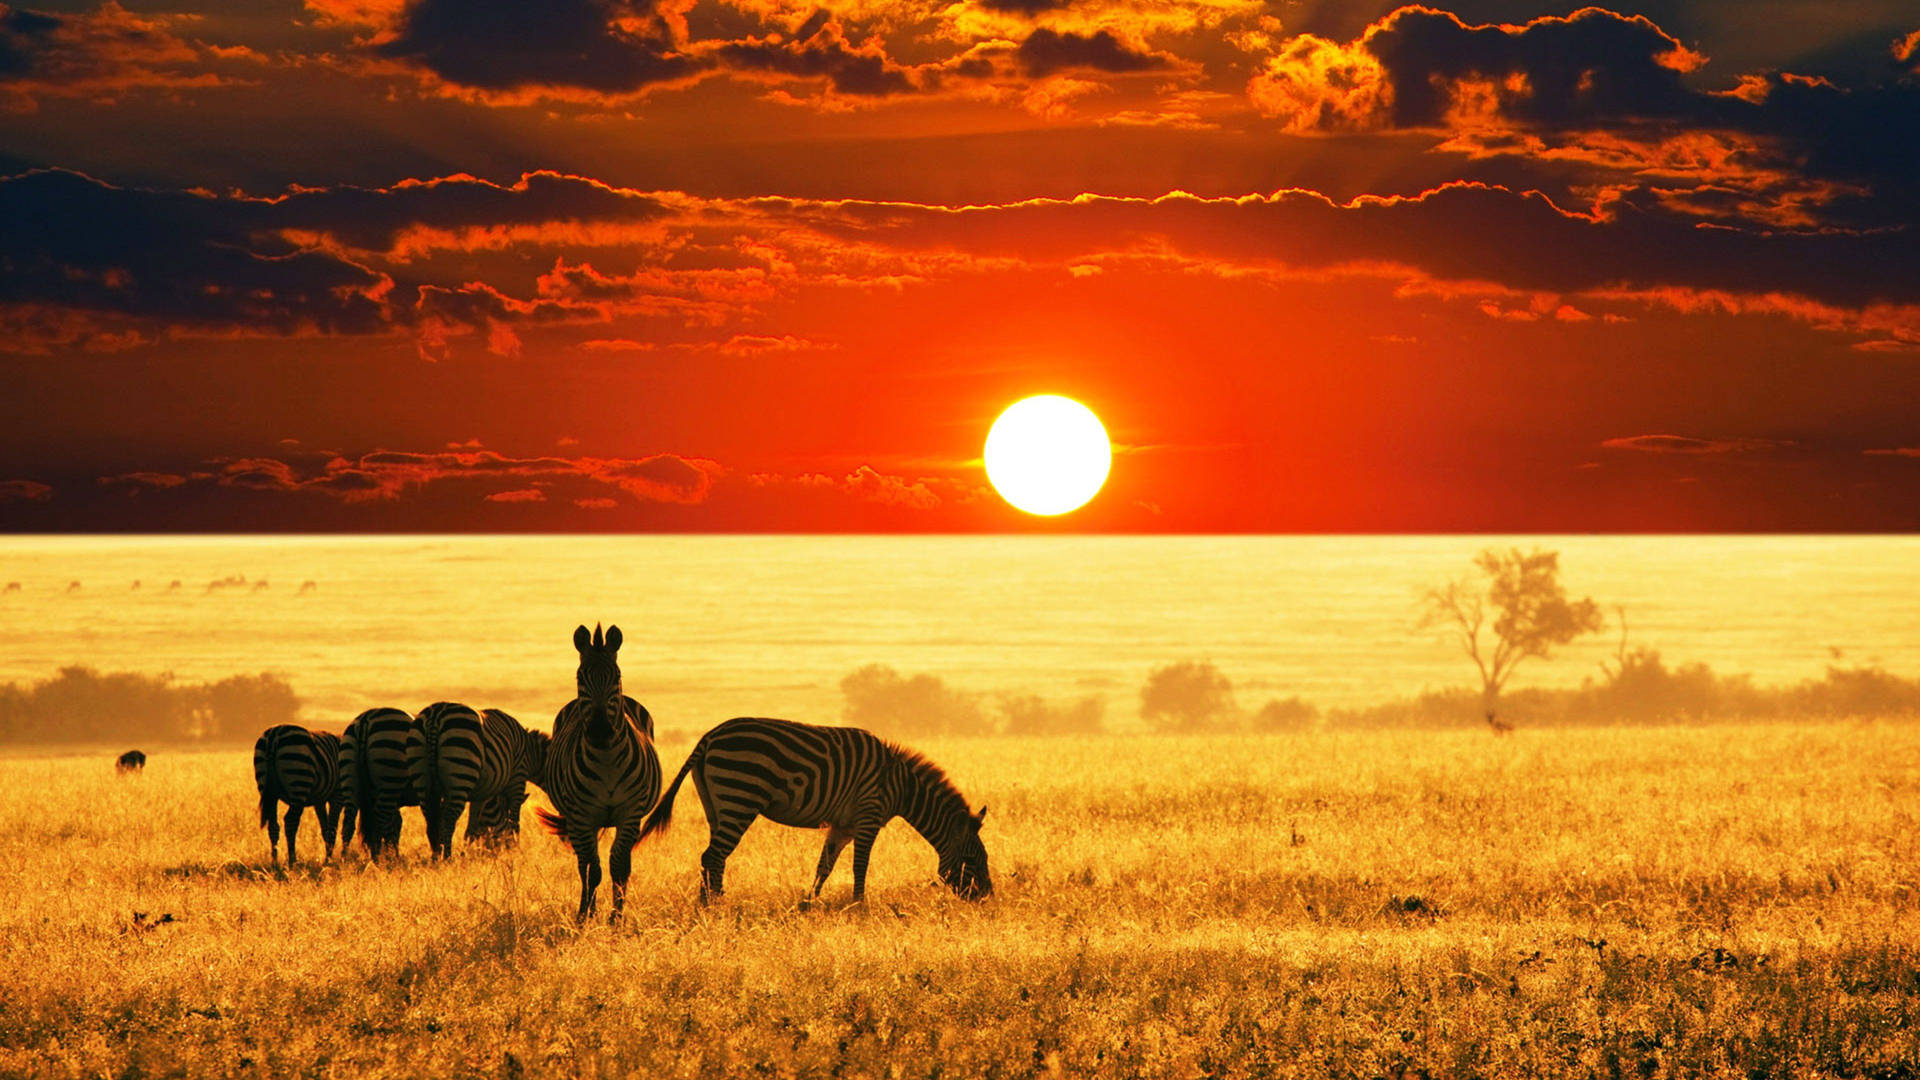 Zebra And Sunset In Africa